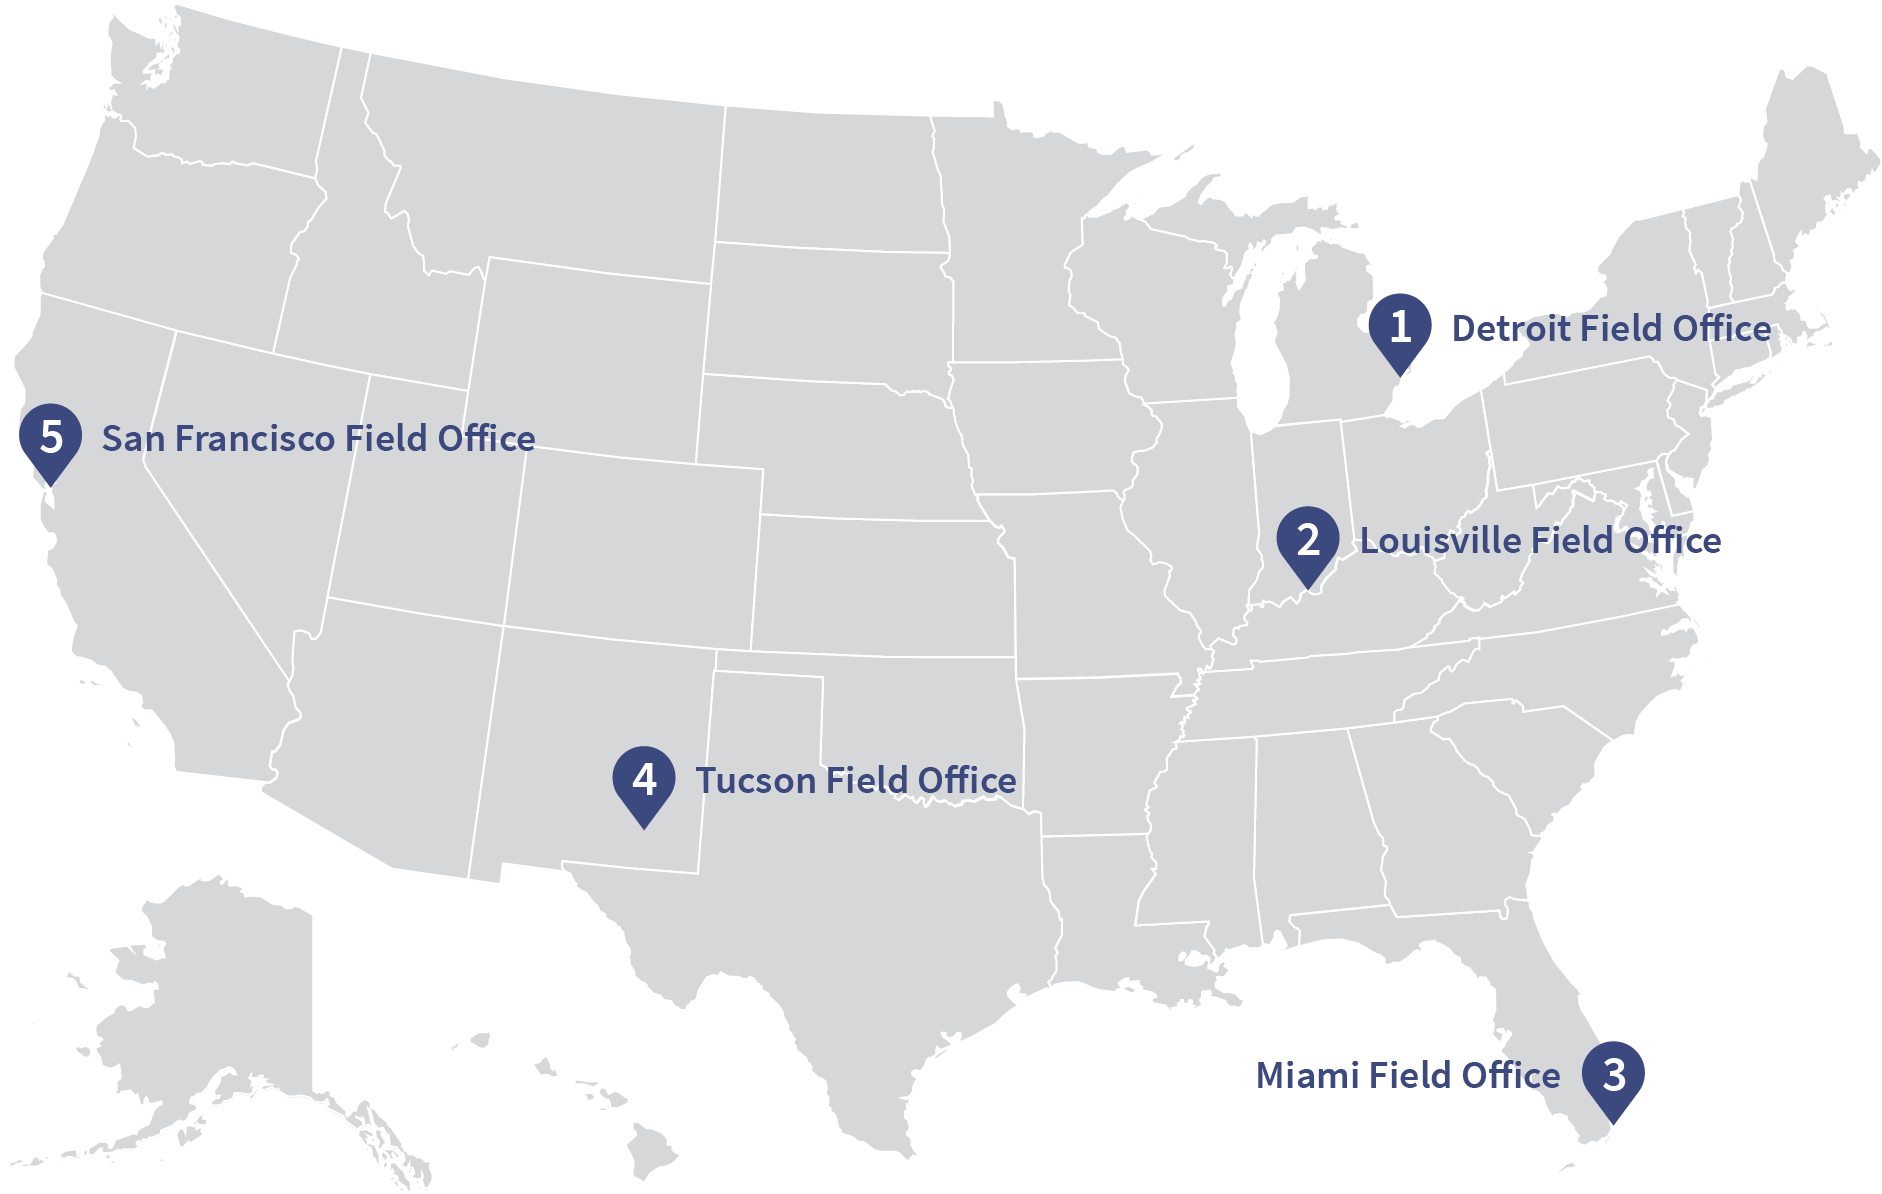 A map of the continental United States displaying field office locations in Detroit, Louisville, Miami, Tuscon, and San Francisco. 